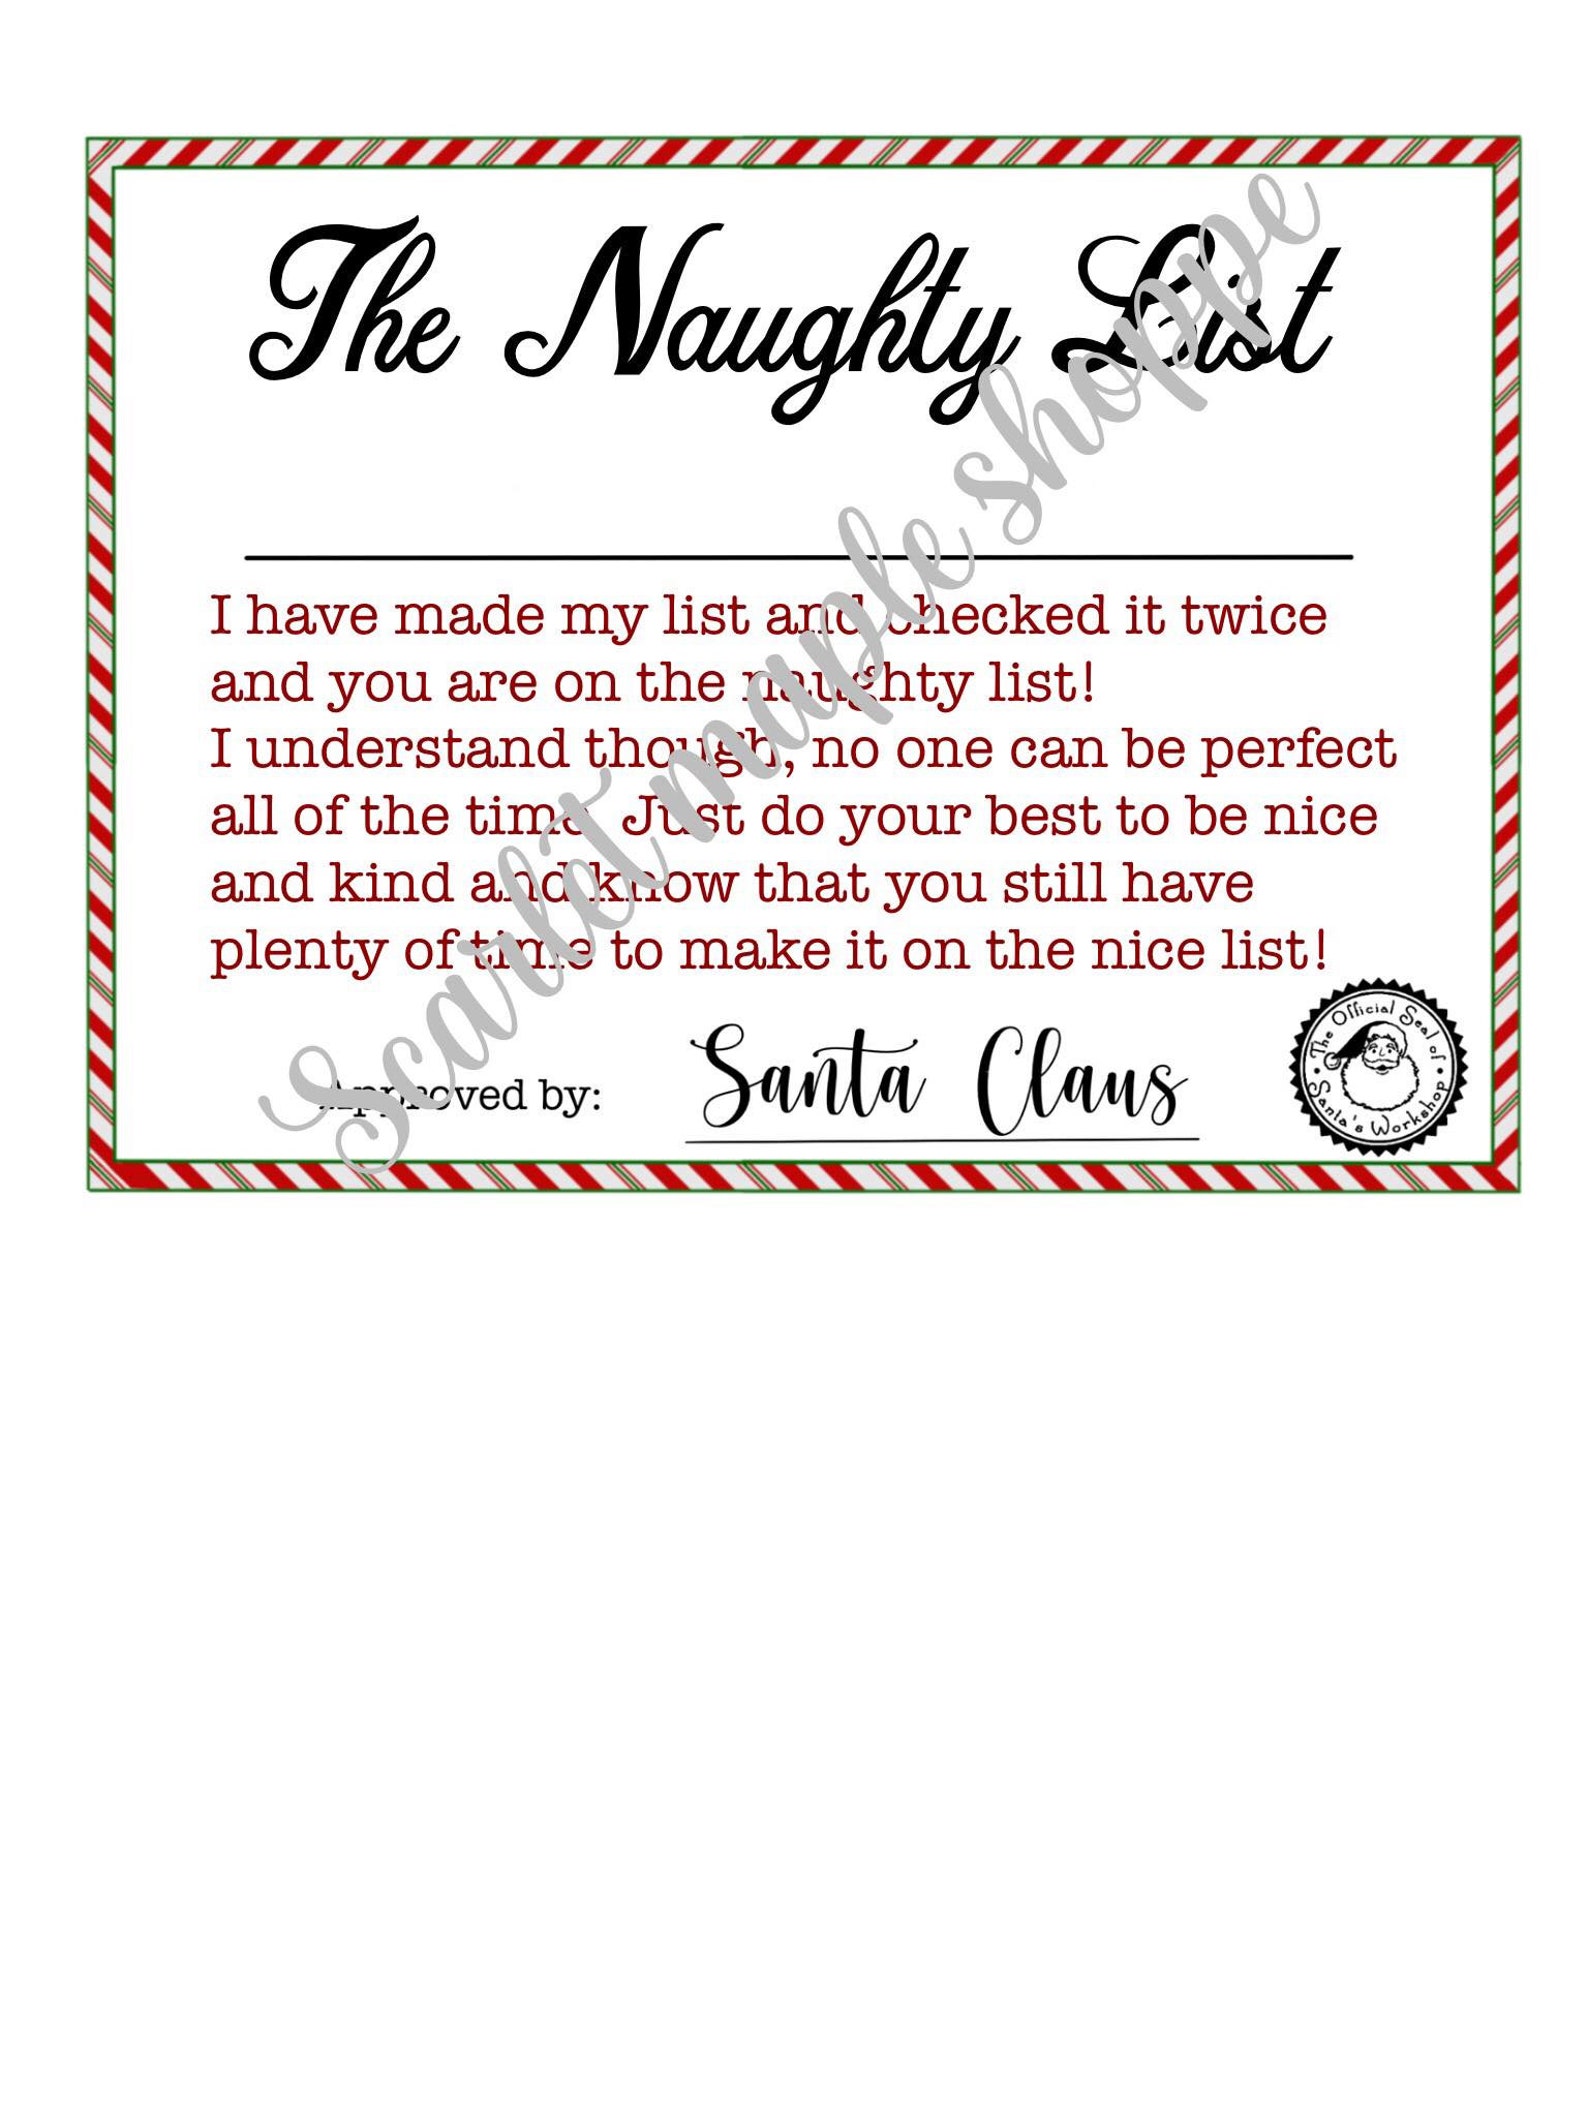 naughty-list-digital-download-png-jpeg-and-word-document-etsy-ireland